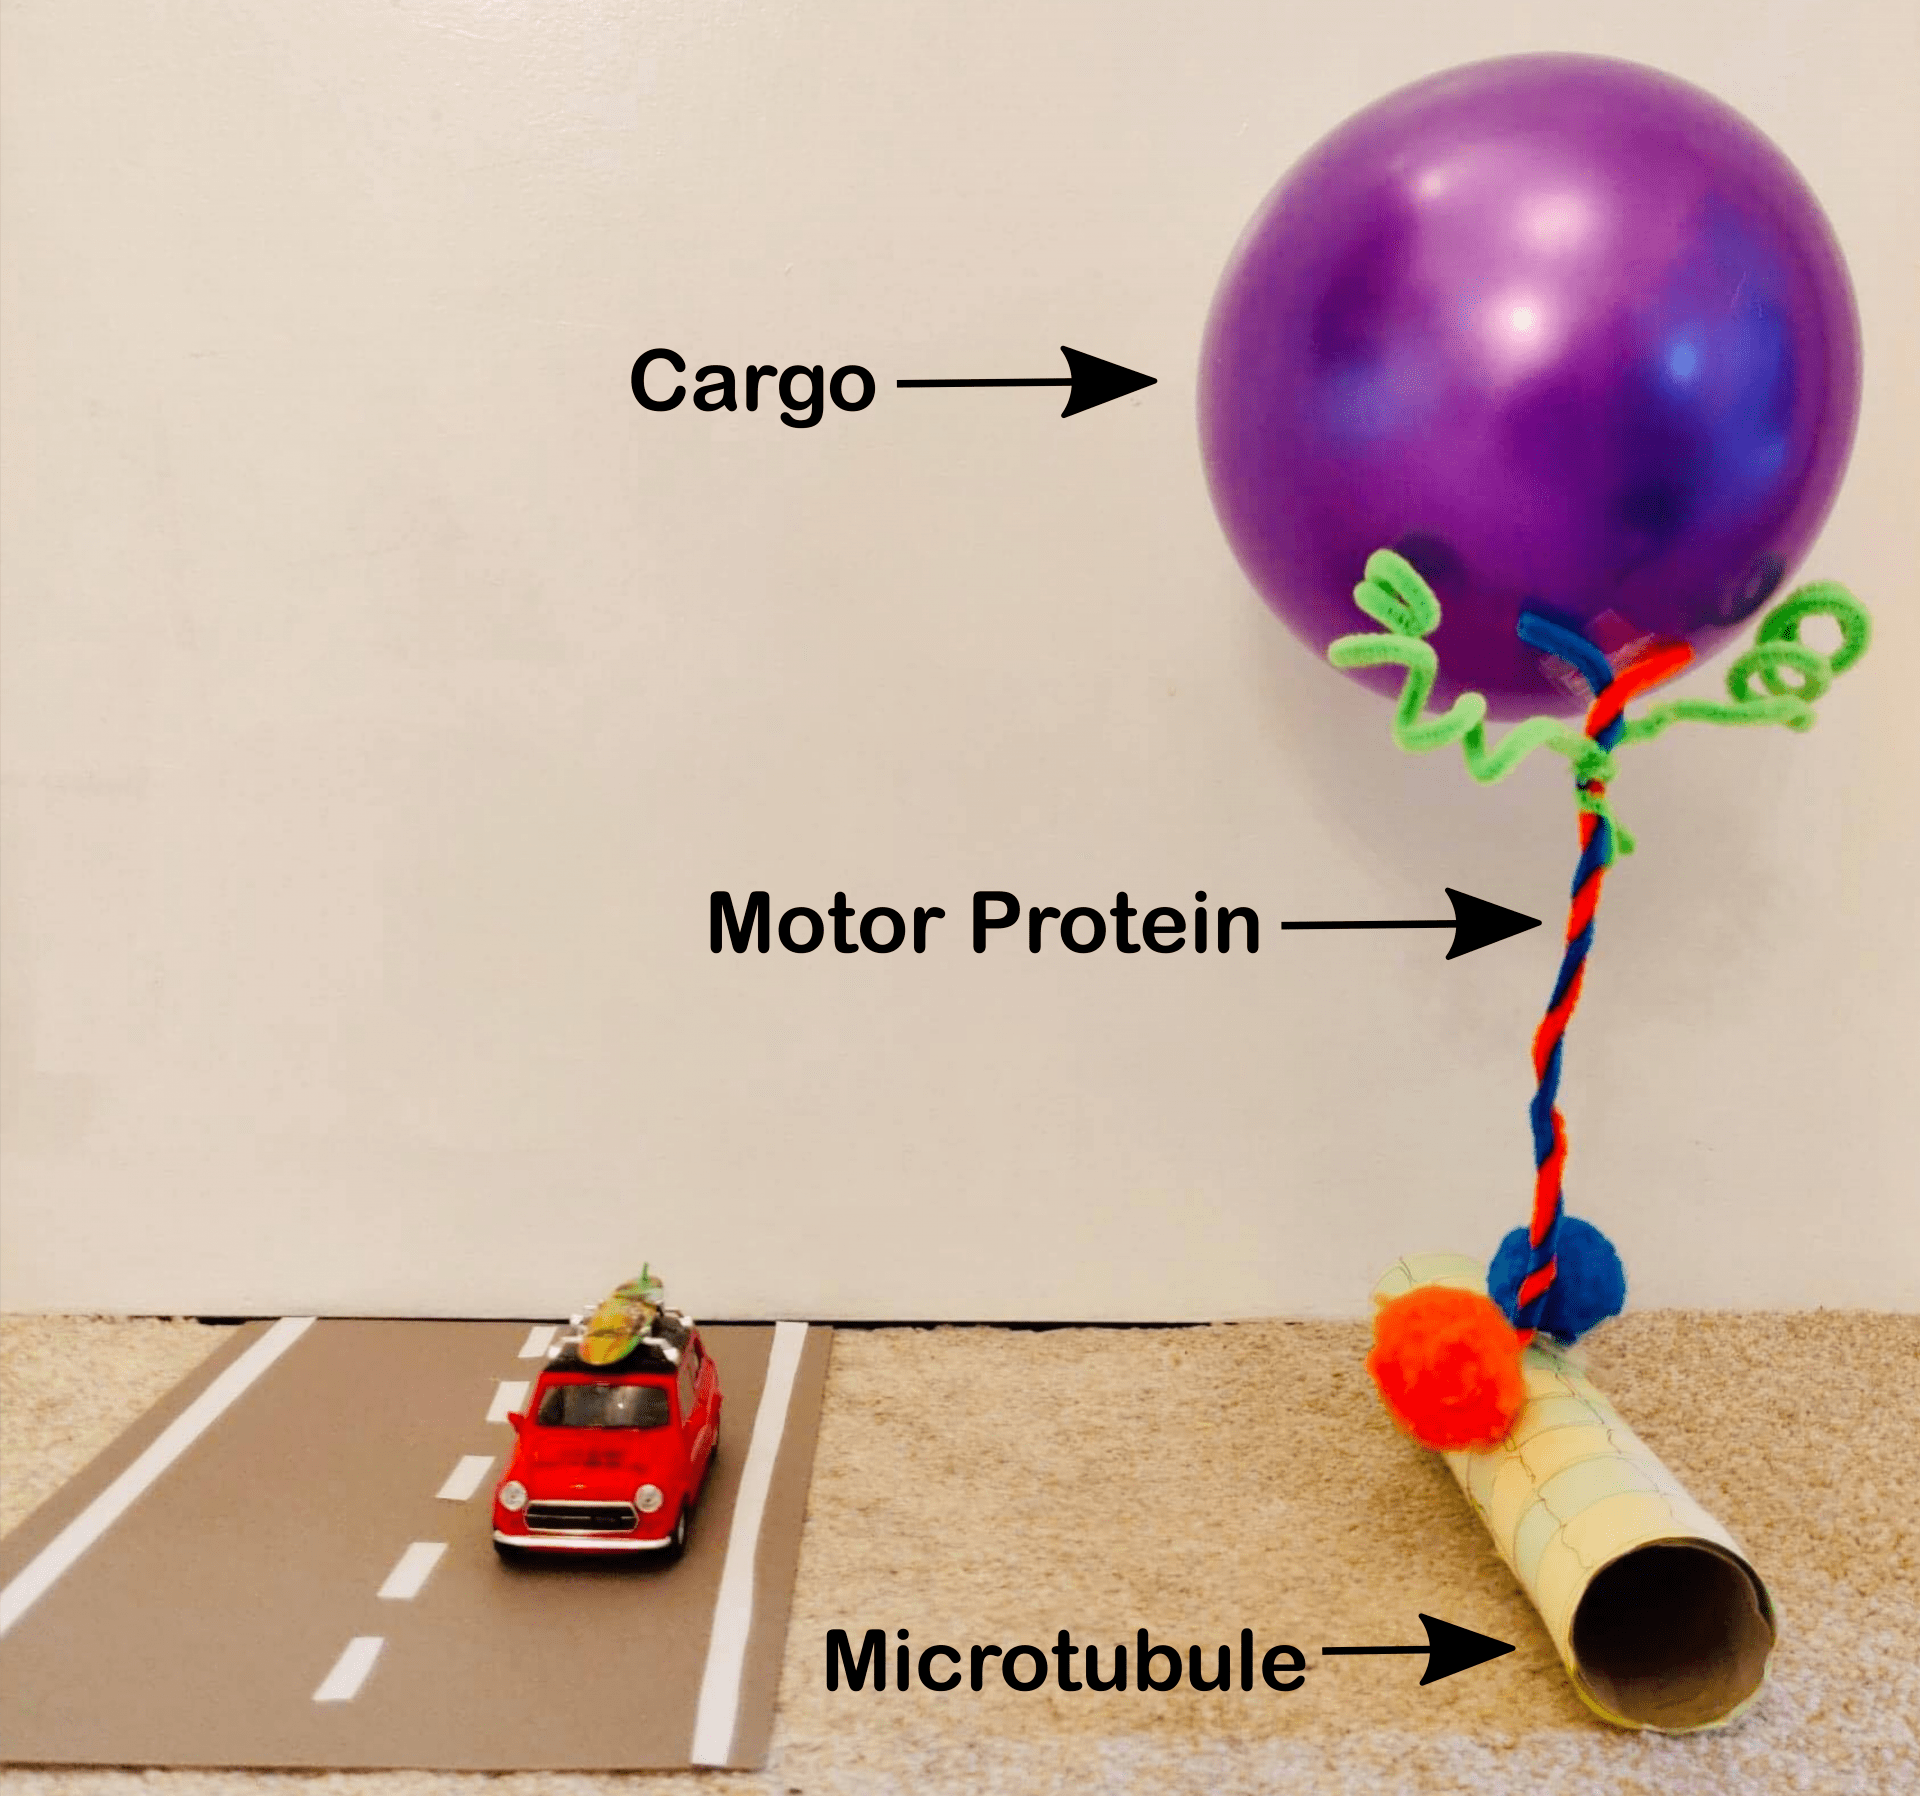 A balloon (labelled 'cargo'). Beneath it are pipe cleaners (labelled 'motor protein') and a cardboard tube ('labelled microtubule'). To the left of these items is a toy car on a road.